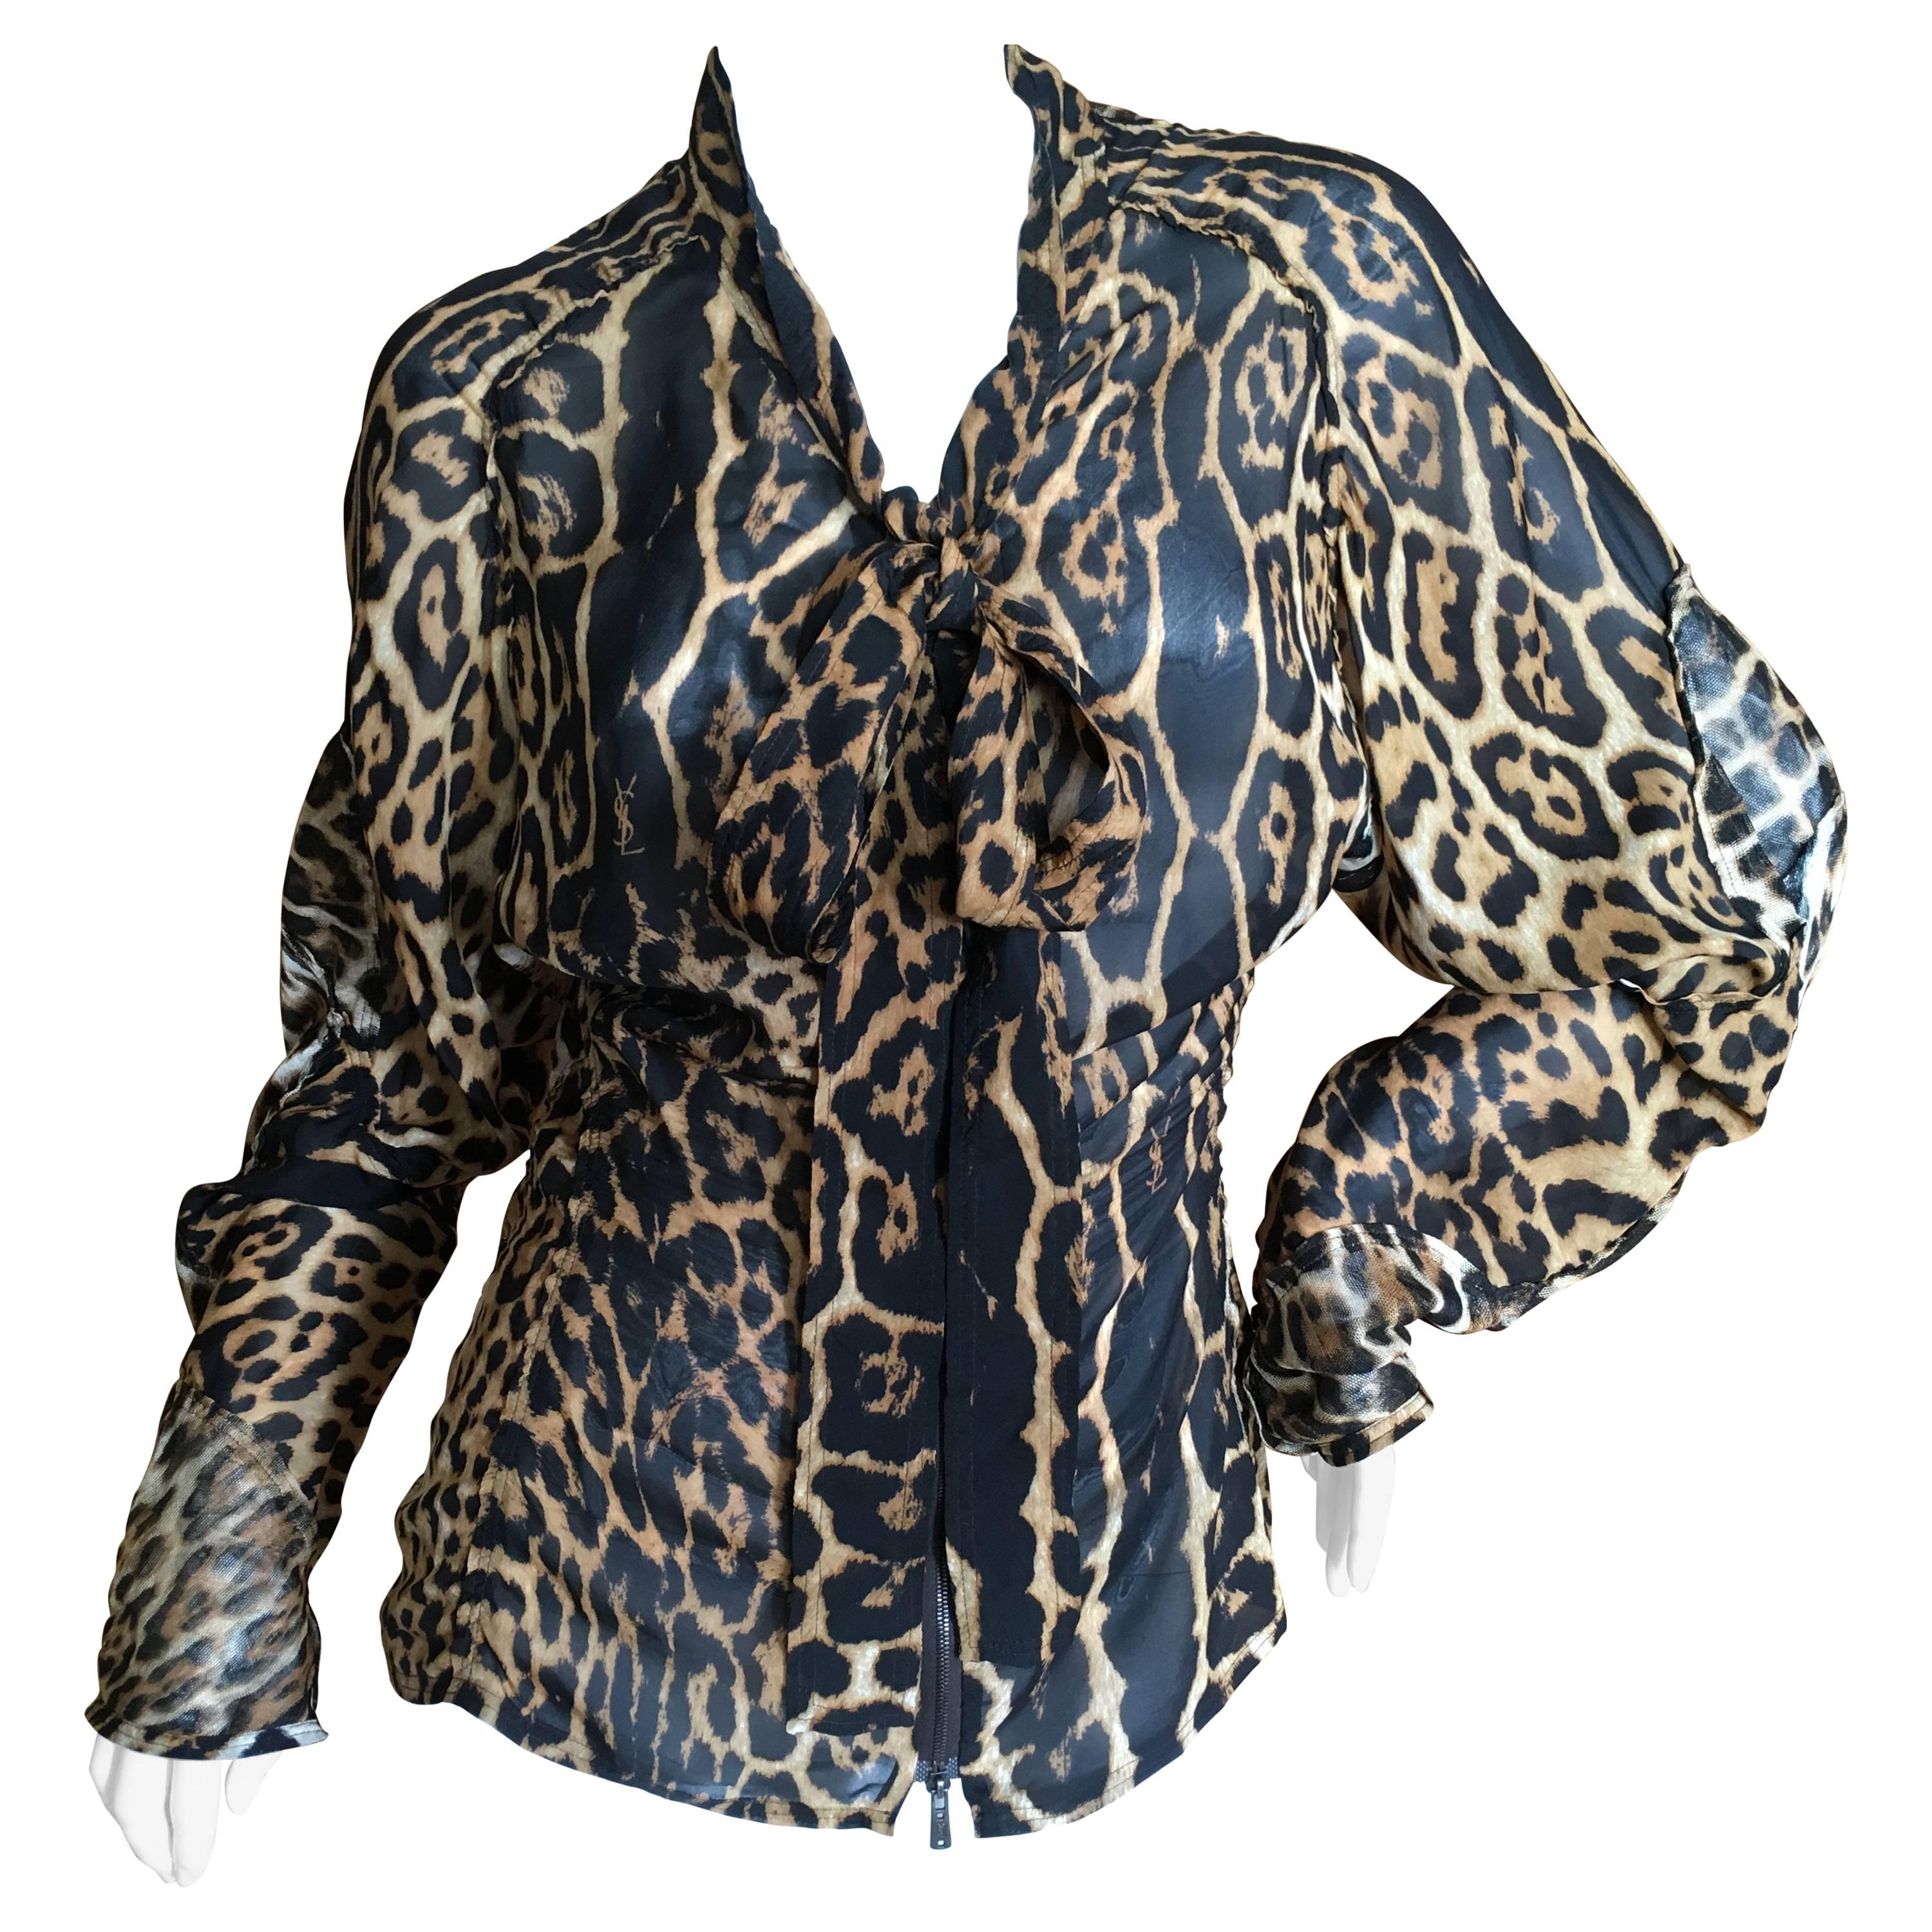 Yves Saint Laurent Silk Leopard Print Top by Tom Ford